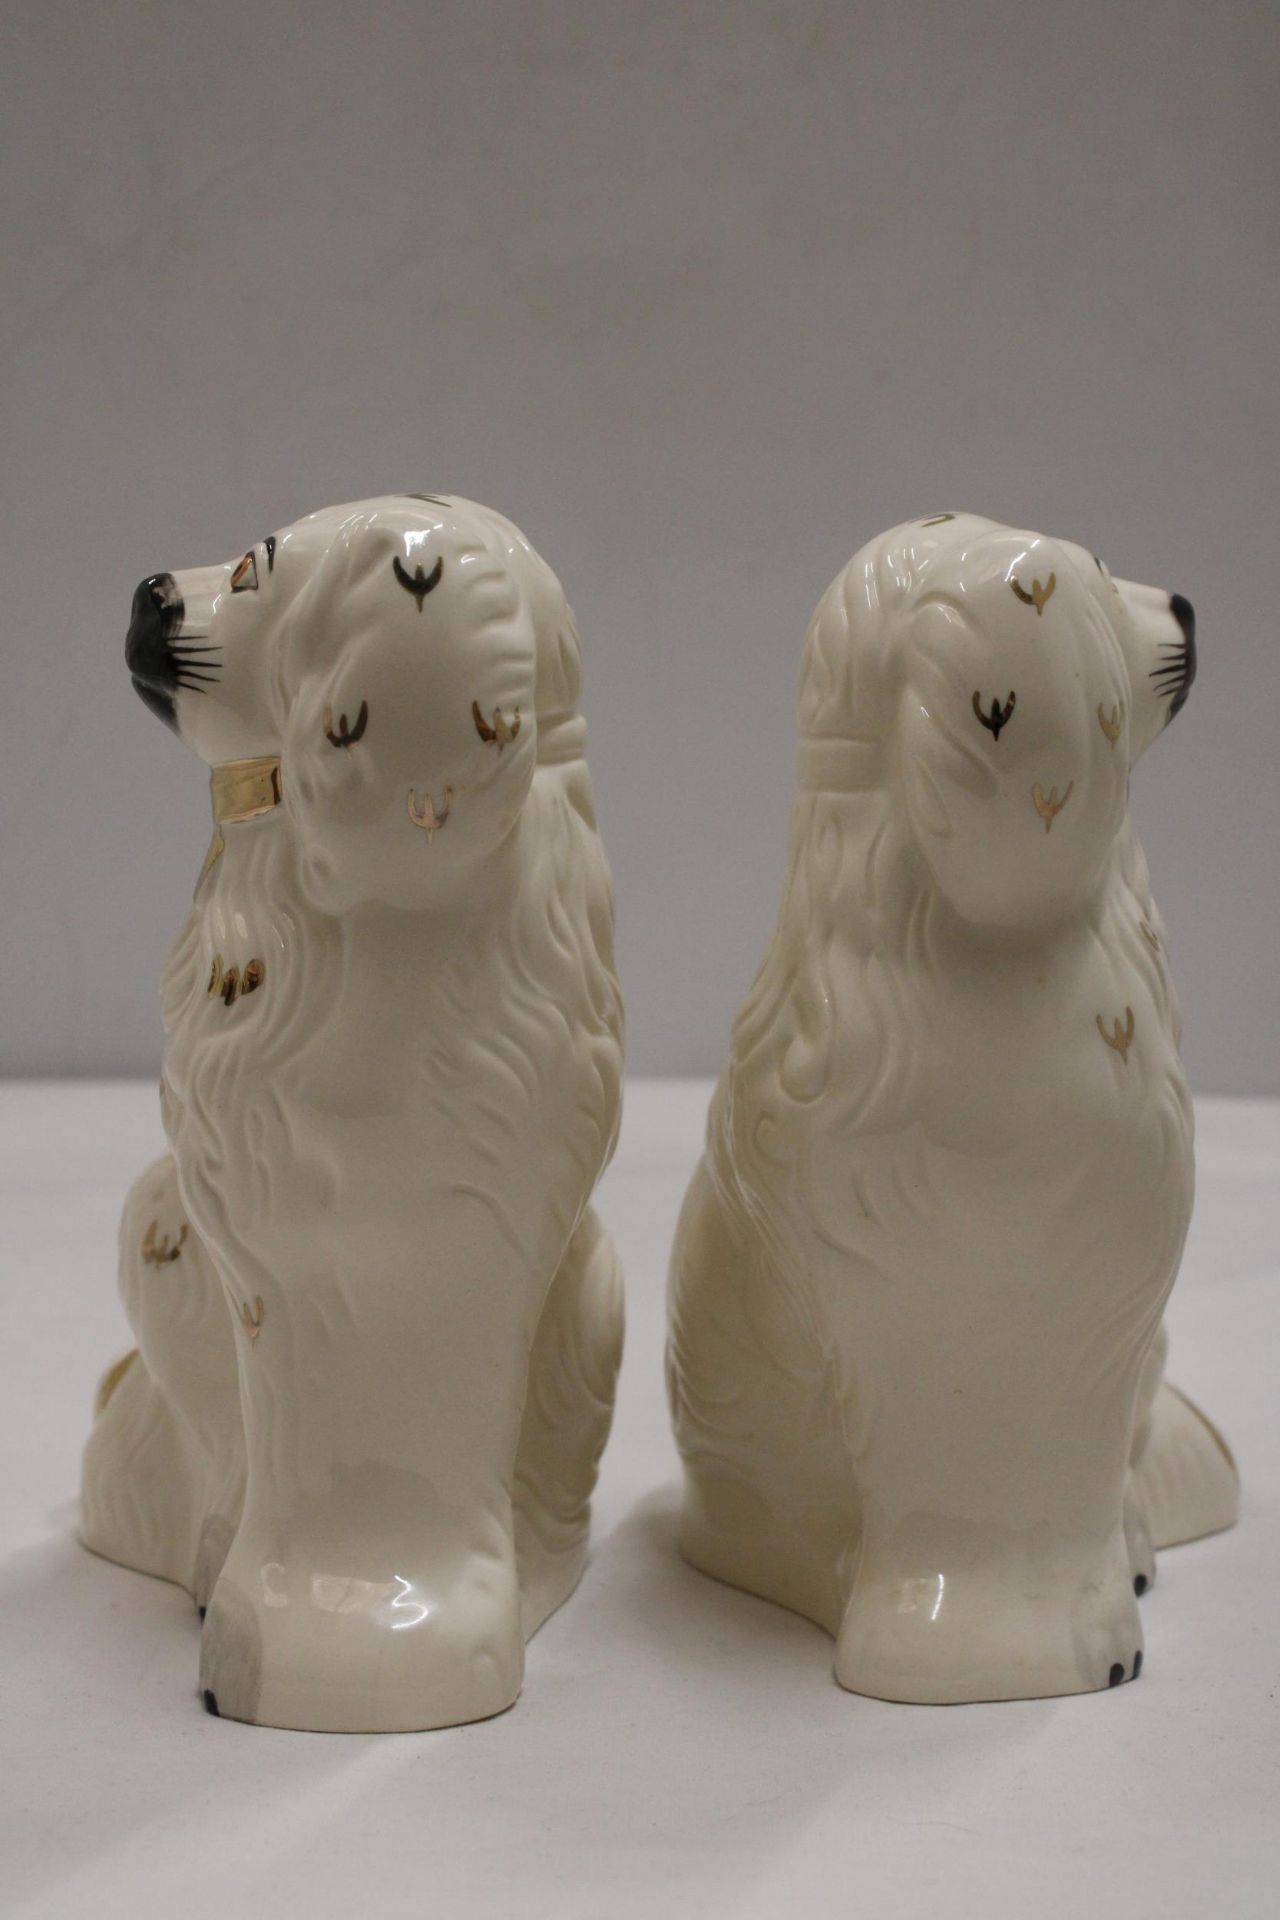 A LARGE SIZED PAIR OF ROYAL DOULTON SPANIEL DOGS IN ORIGINAL BOX - Image 3 of 6